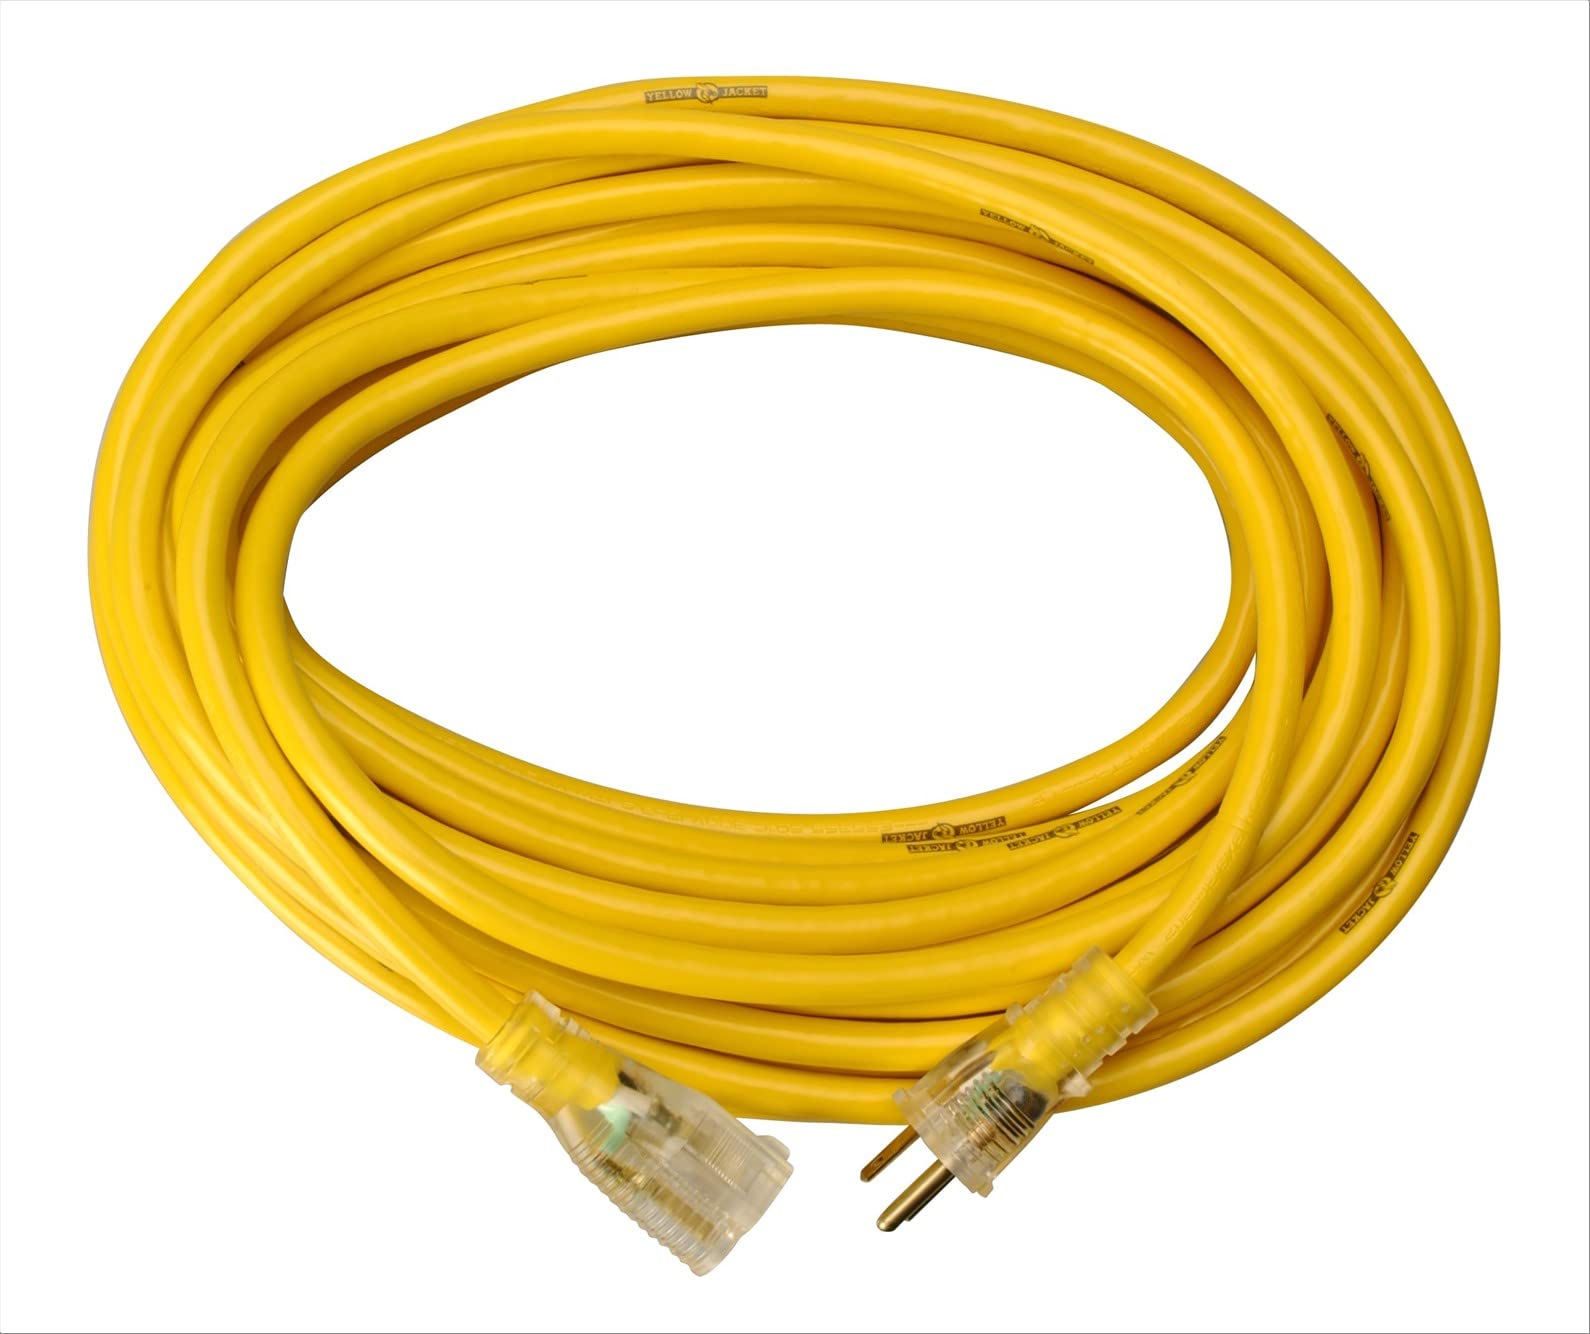 25' Yellow Jacket 12/3 Heavy-Duty 15-Amp SJTW Extension Cord w/ Lighted Ends $22.66 + Free Shipping w/ Prime or on $35+